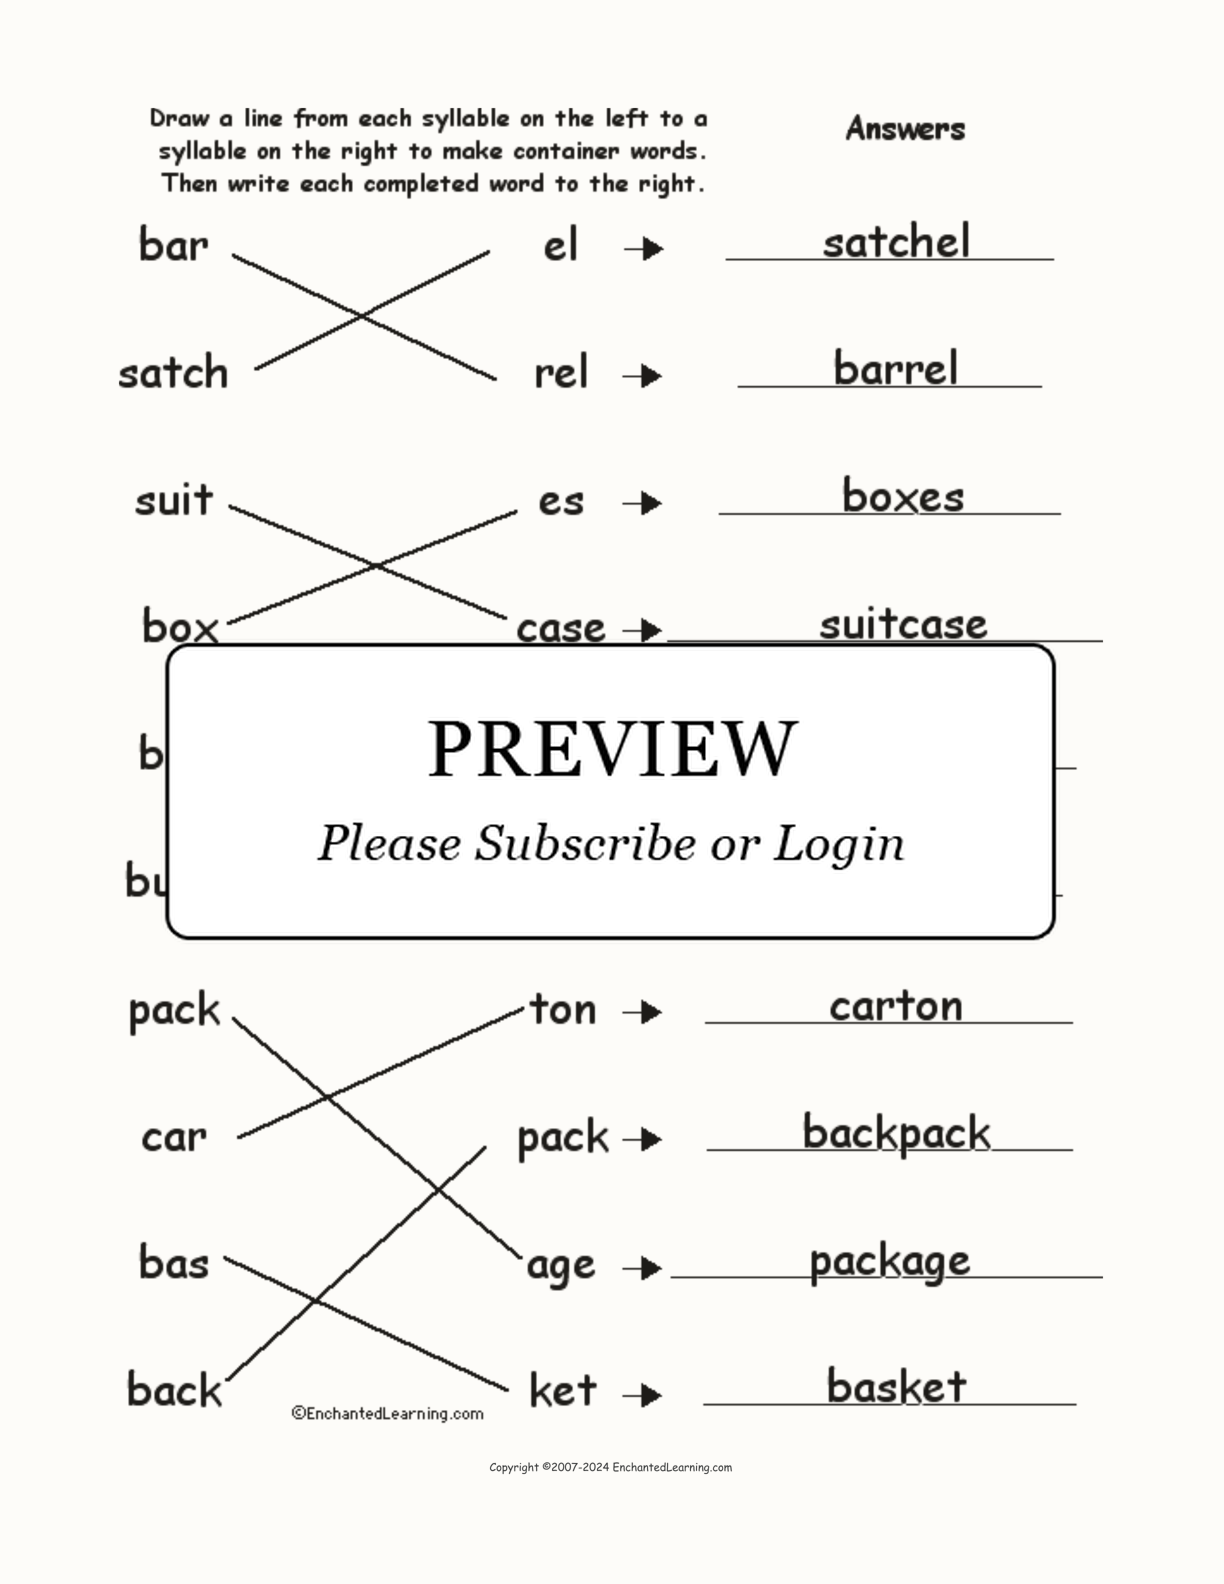 Match the Syllables: Container Words interactive worksheet page 2